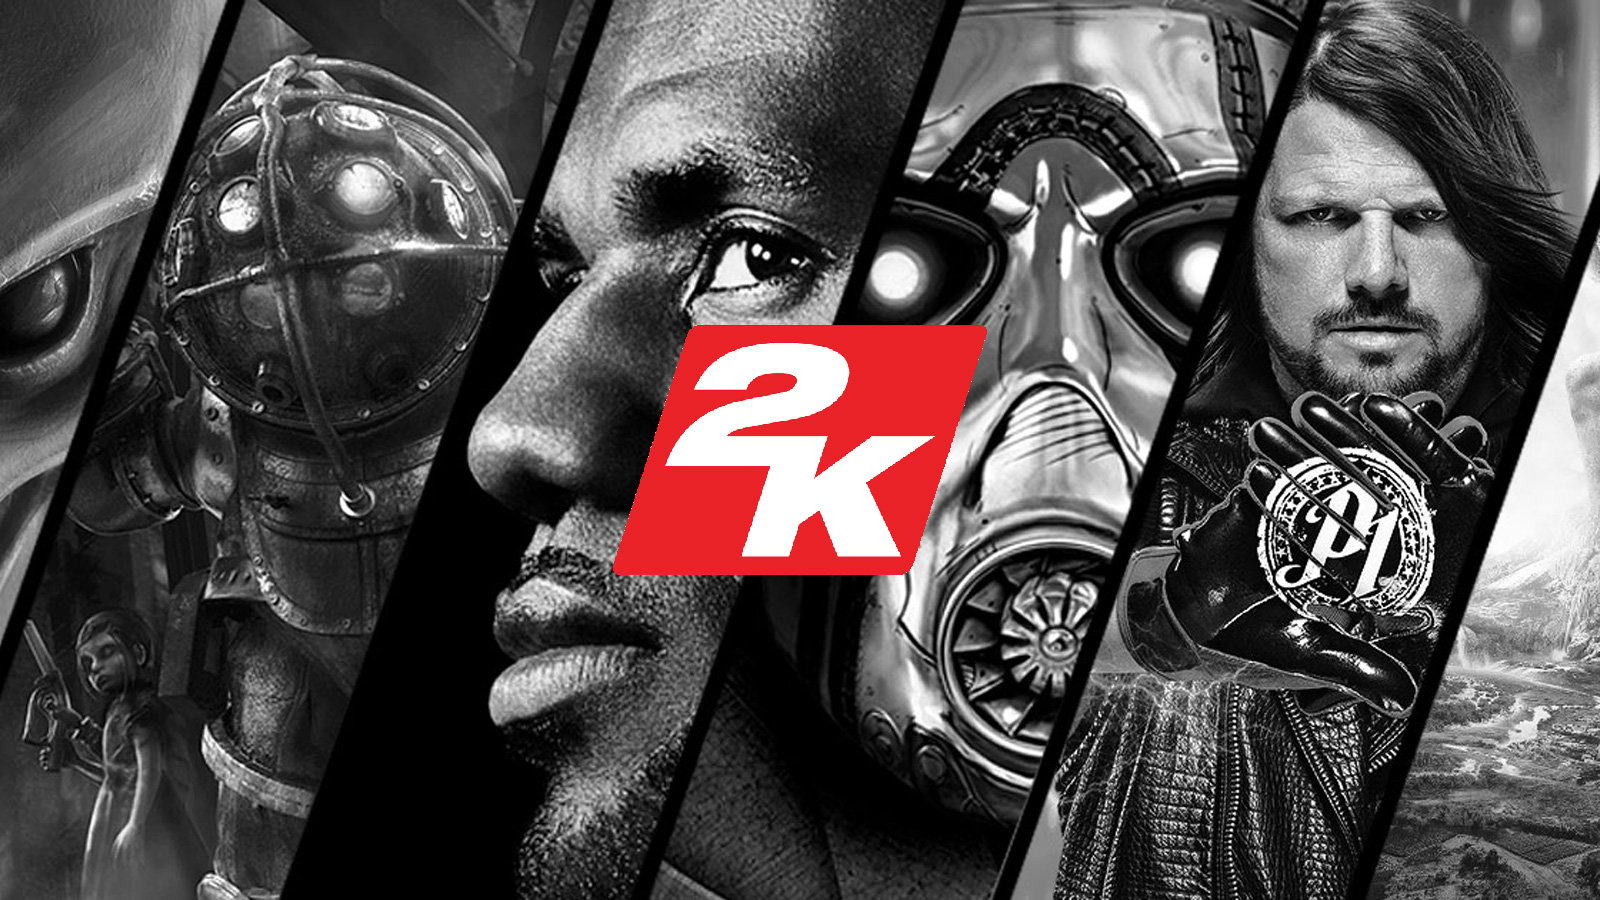 2K games and logo